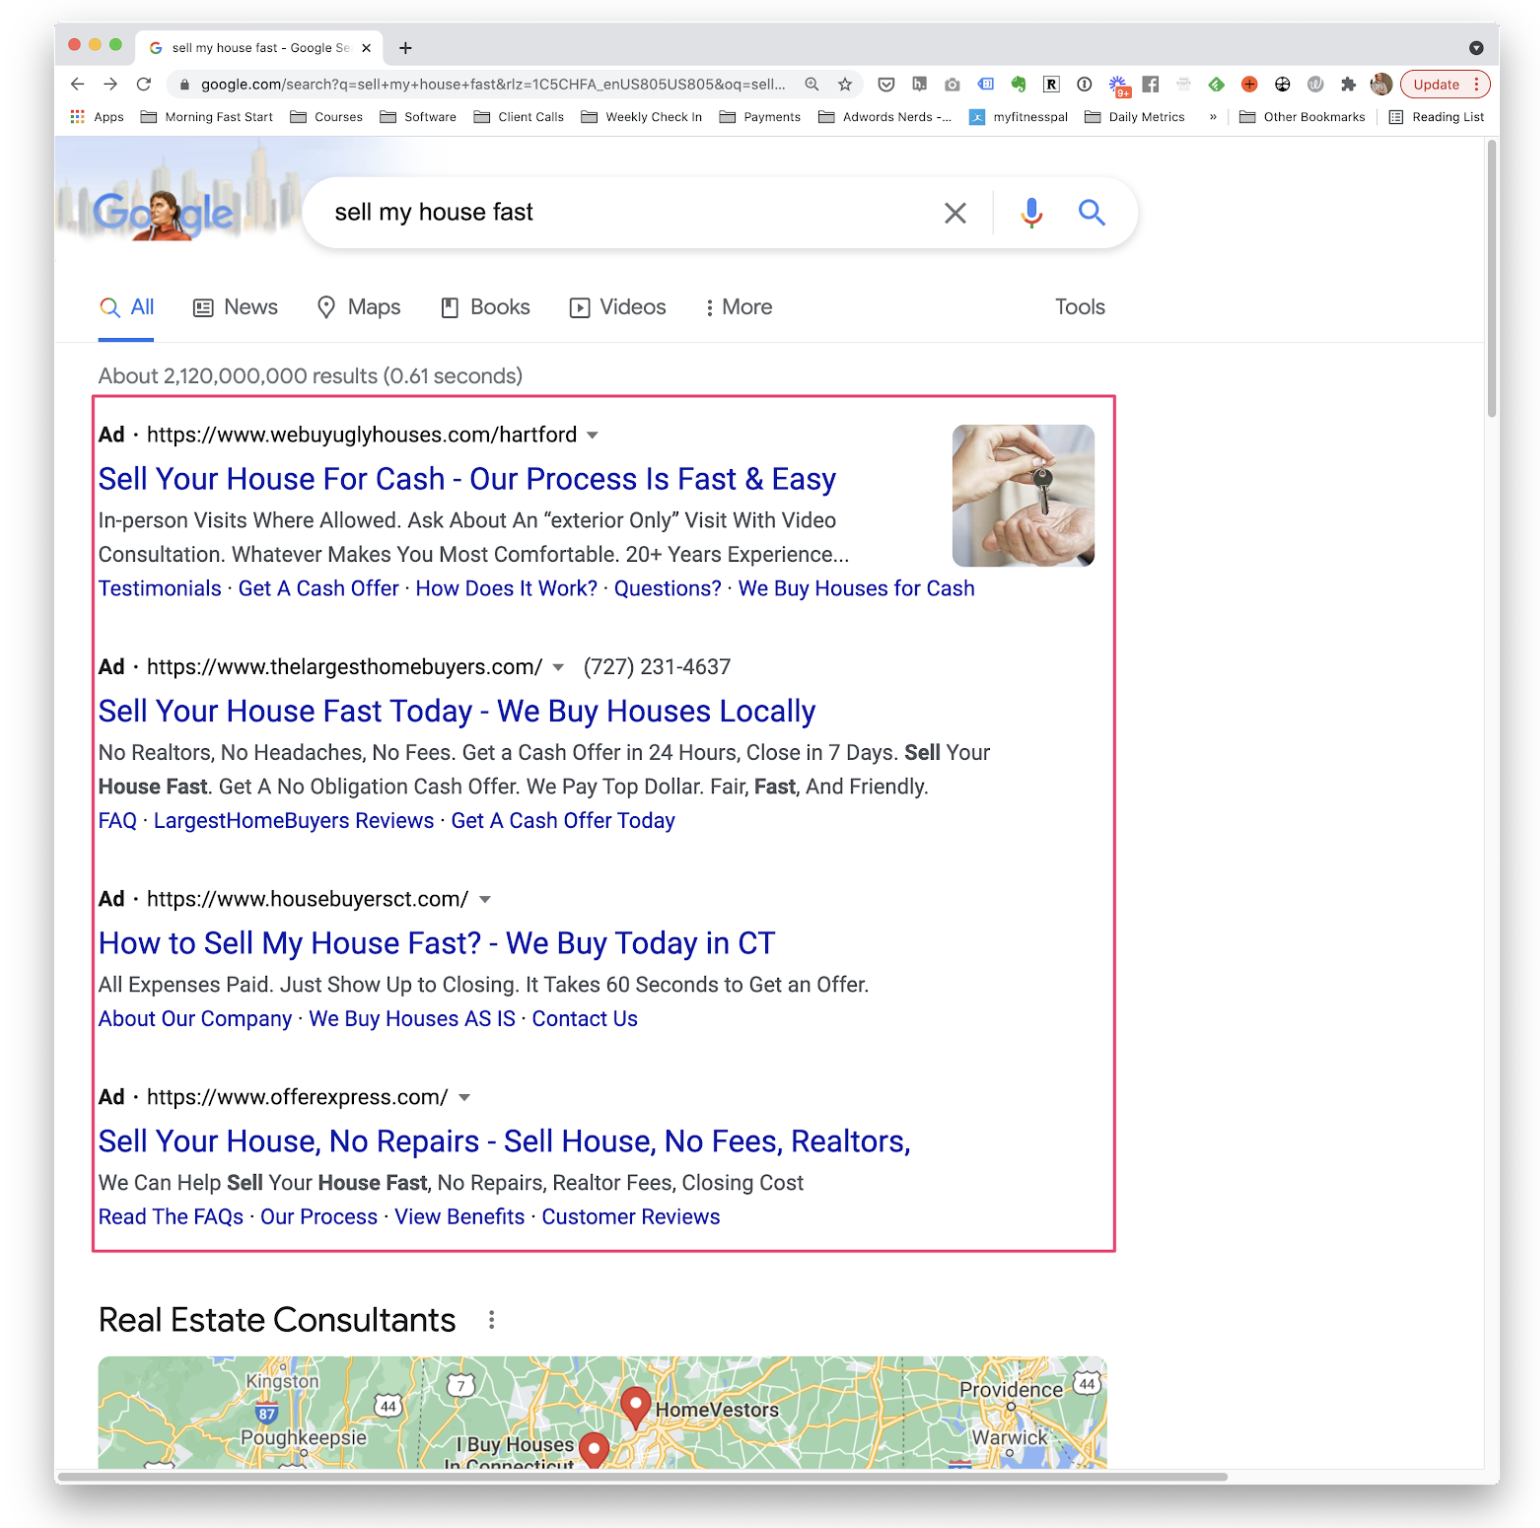 Example of a google search results page